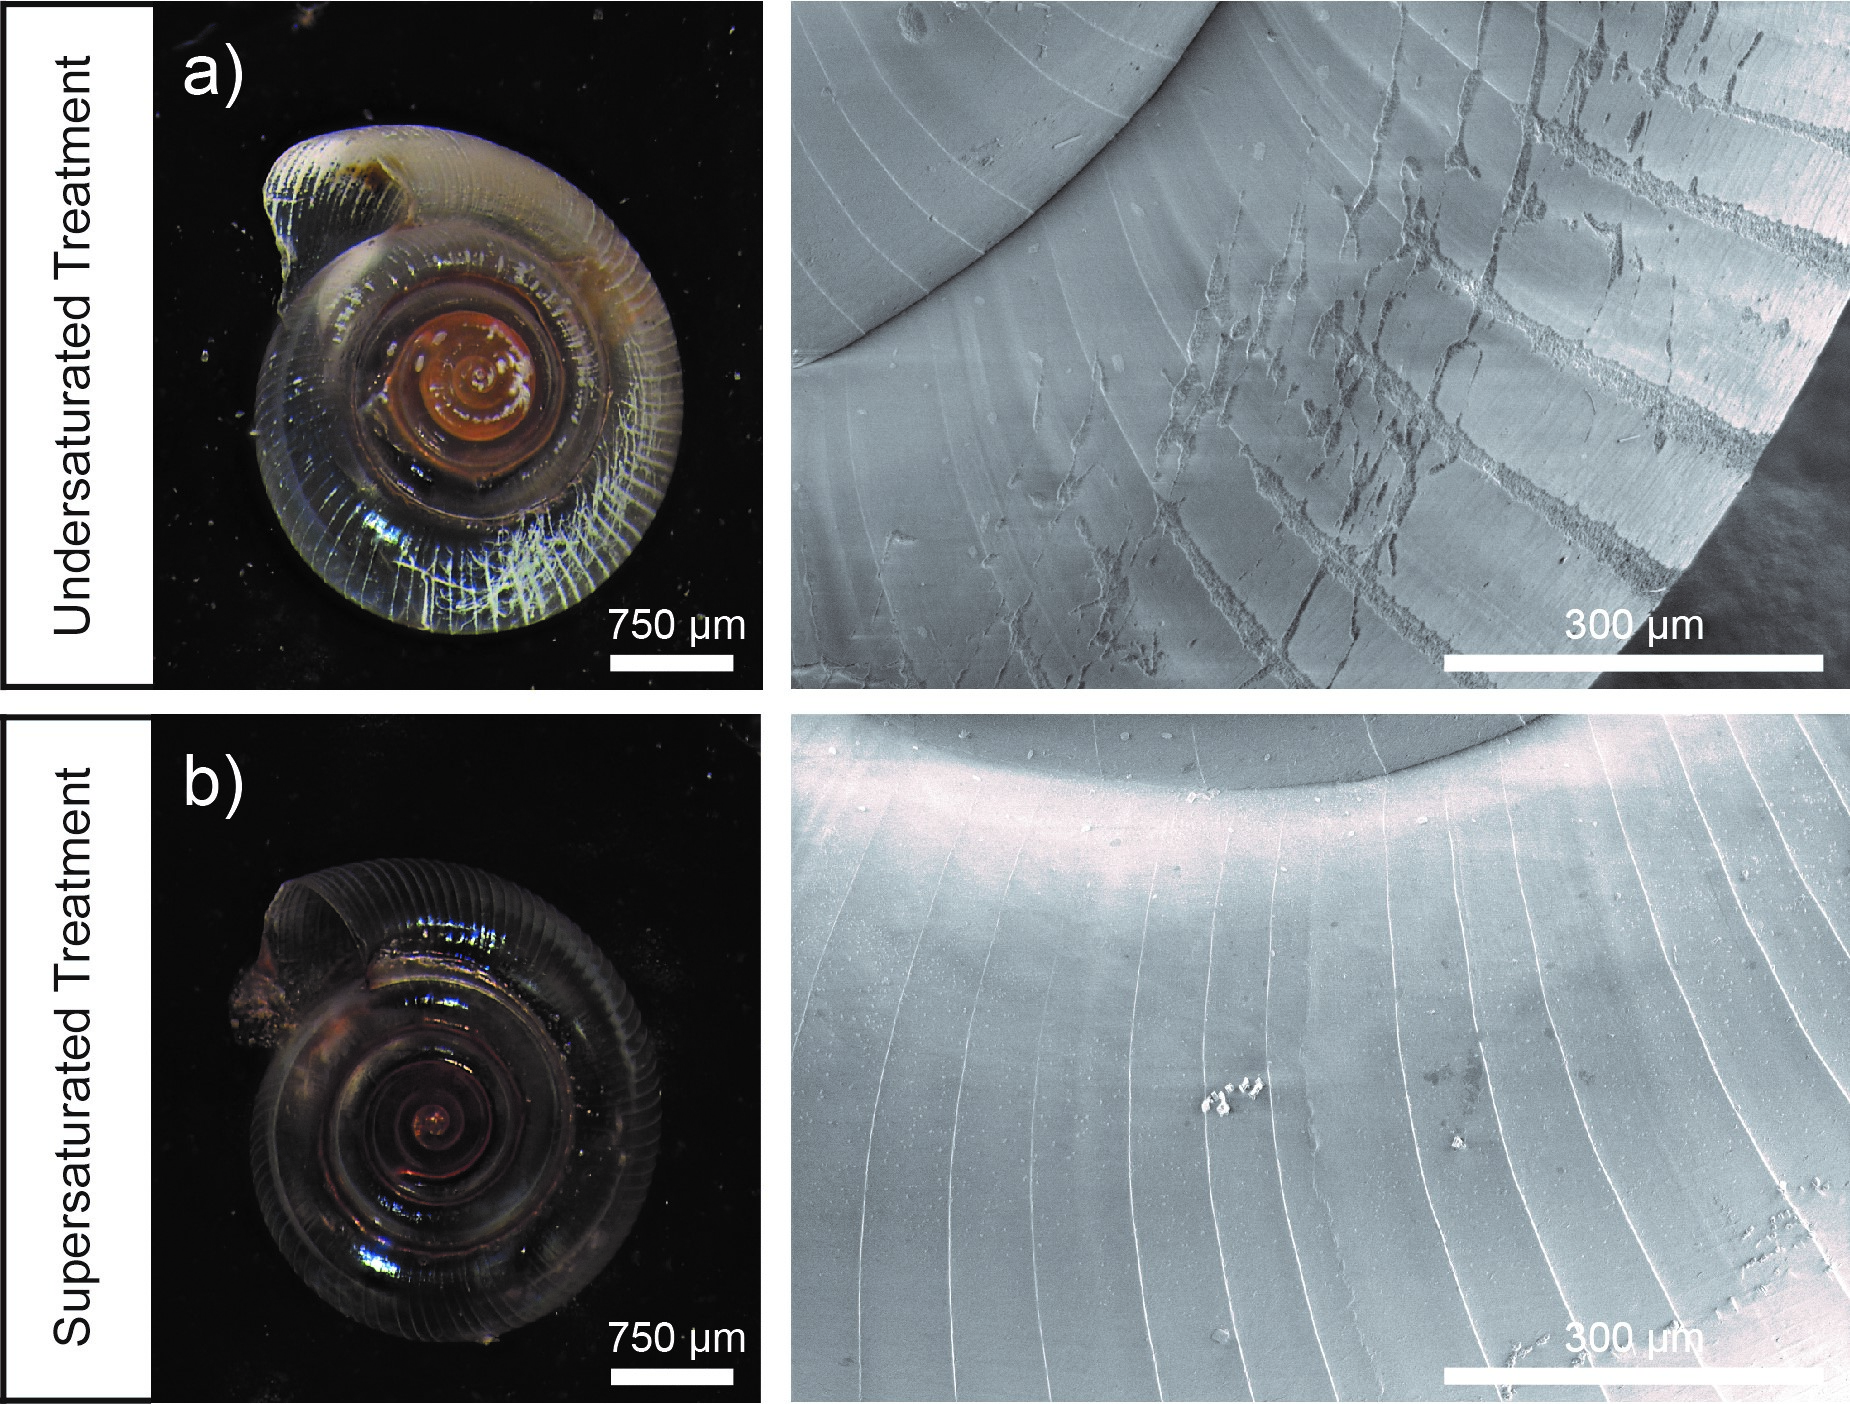 Close up images of the pteropod shell in the undersaturated and supersaturated conditions, displaying the shell damage from the undersaturated condition